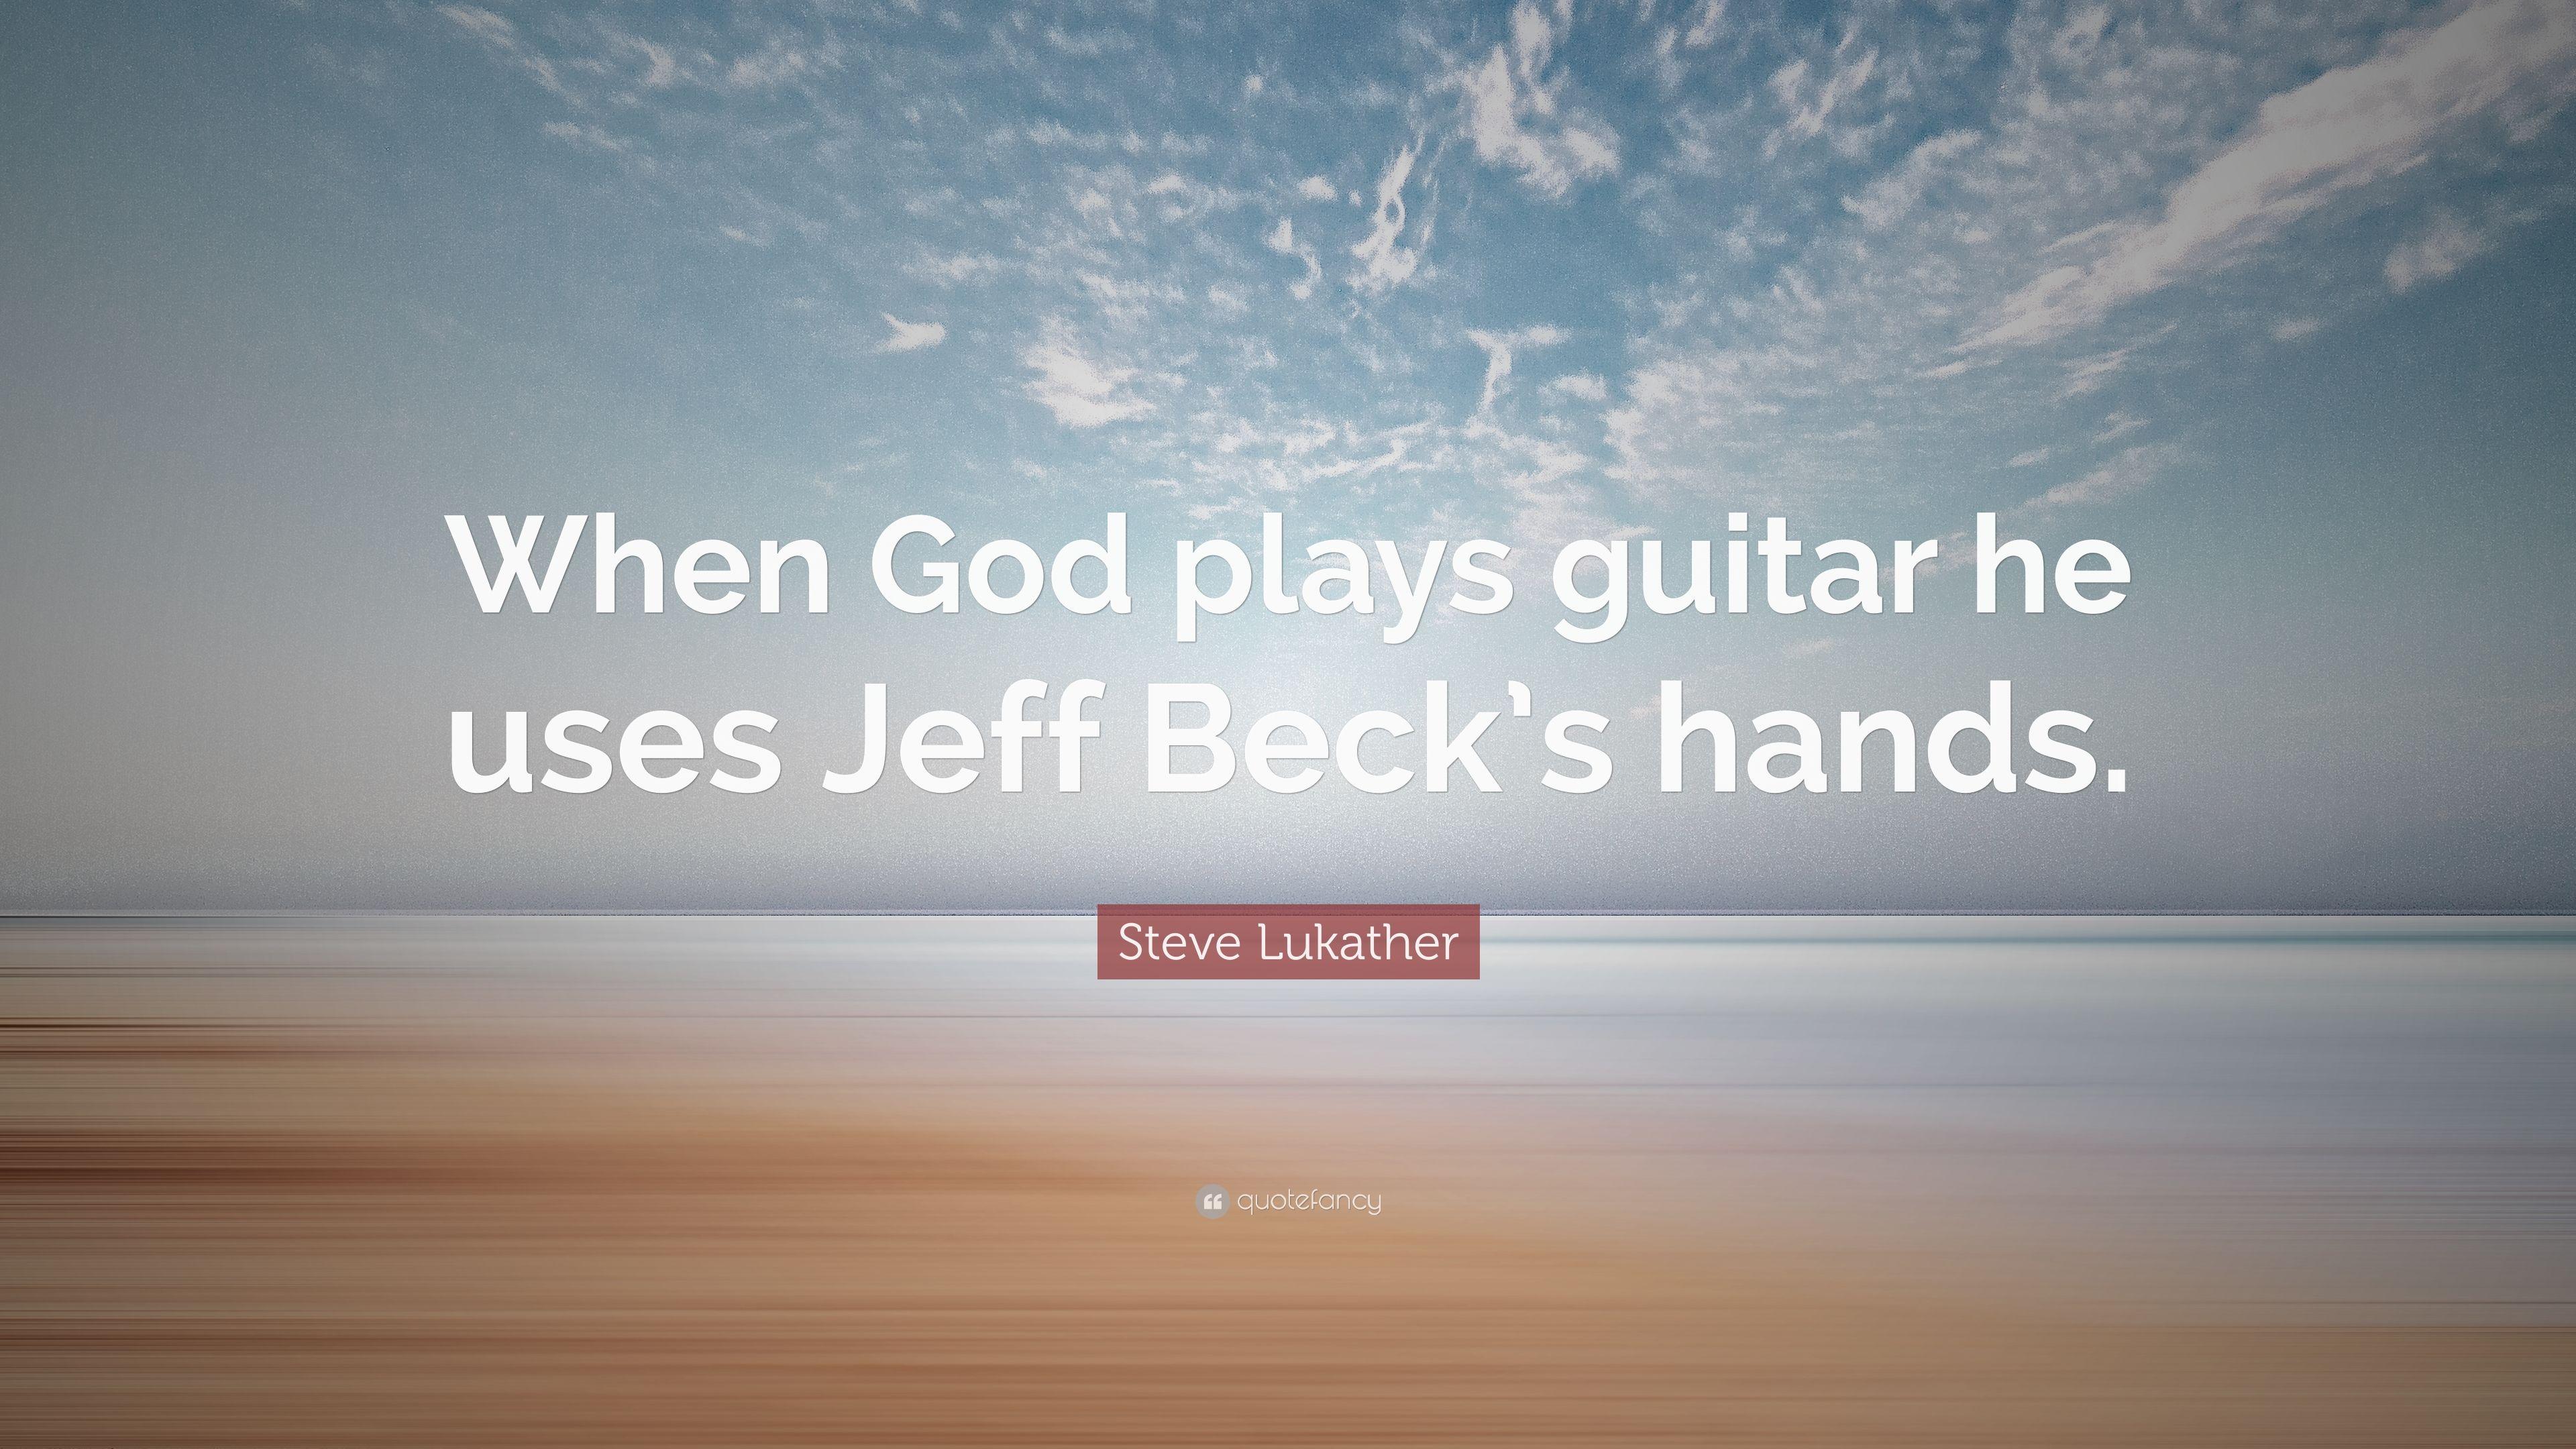 Steve Lukather Quote: “When God plays guitar he uses Jeff Beck's